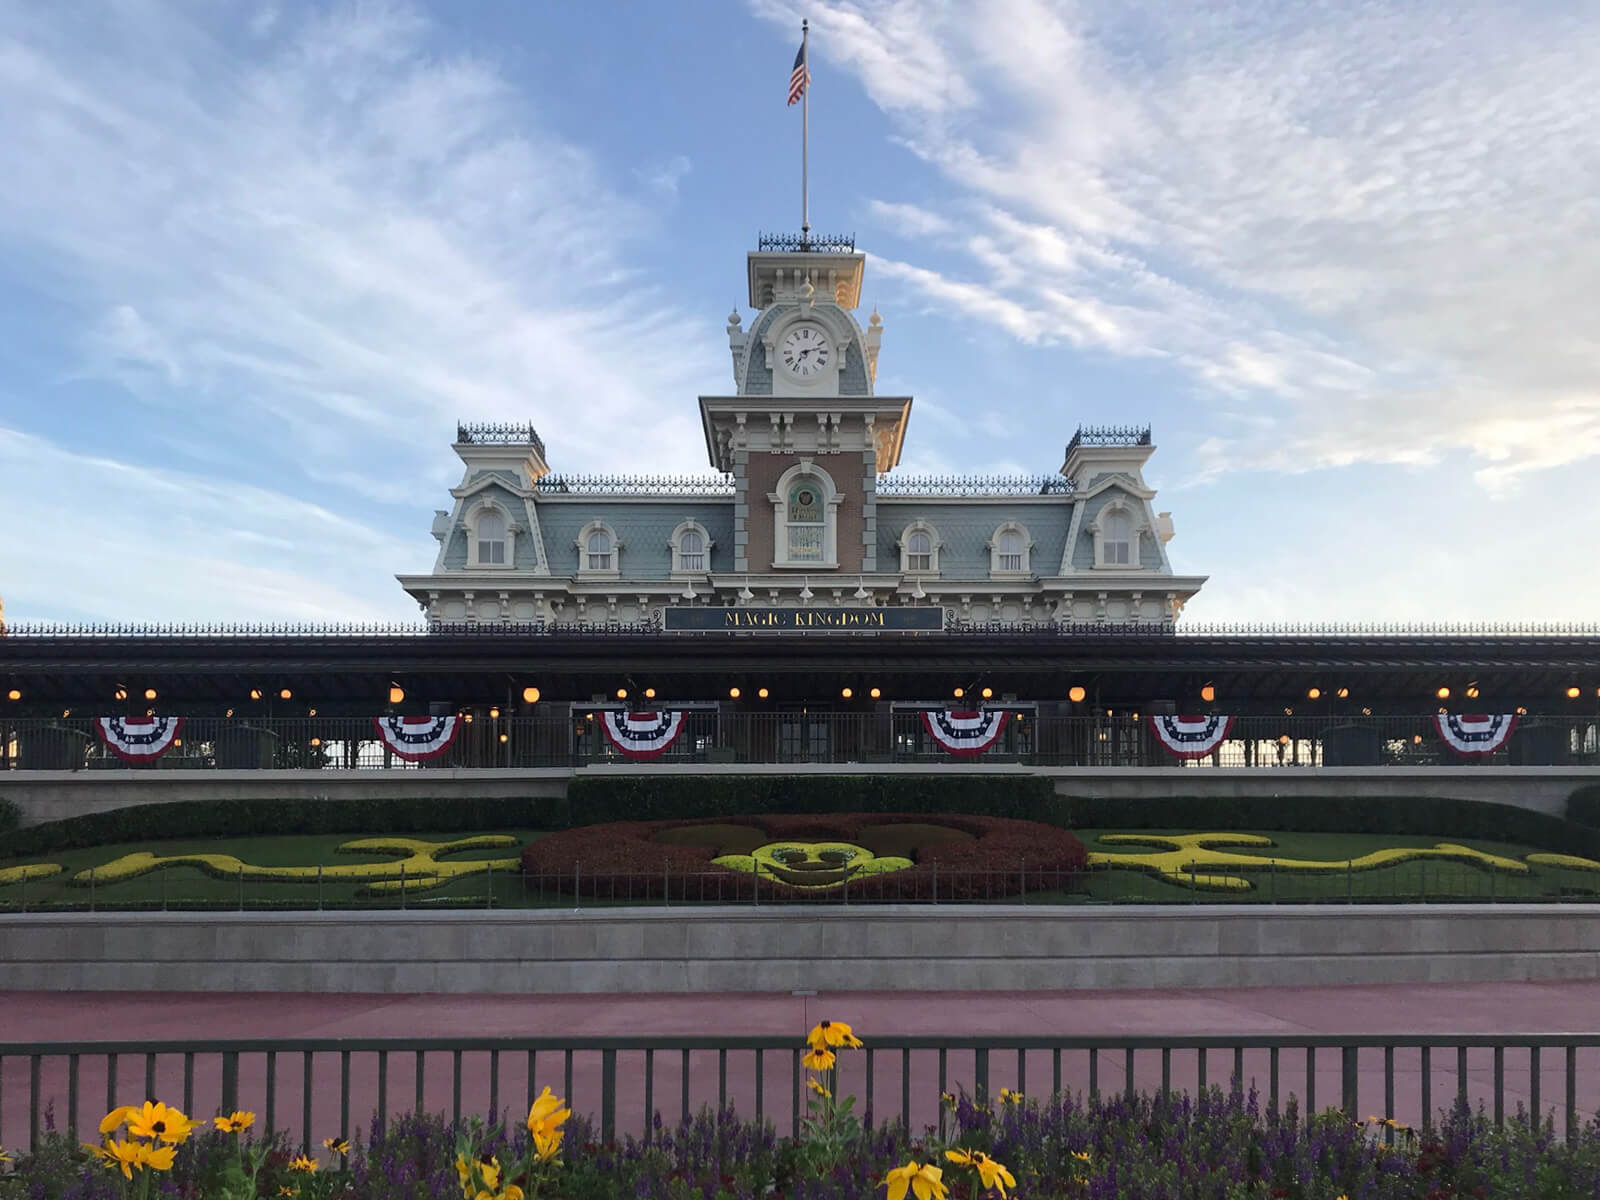 The entrance to Disney World’s Magic Kingdom. In the foreground is a garden with a hedge shaped like Mickey Mouse. In the background is a train station with the flag of the United States of America standing from a pole